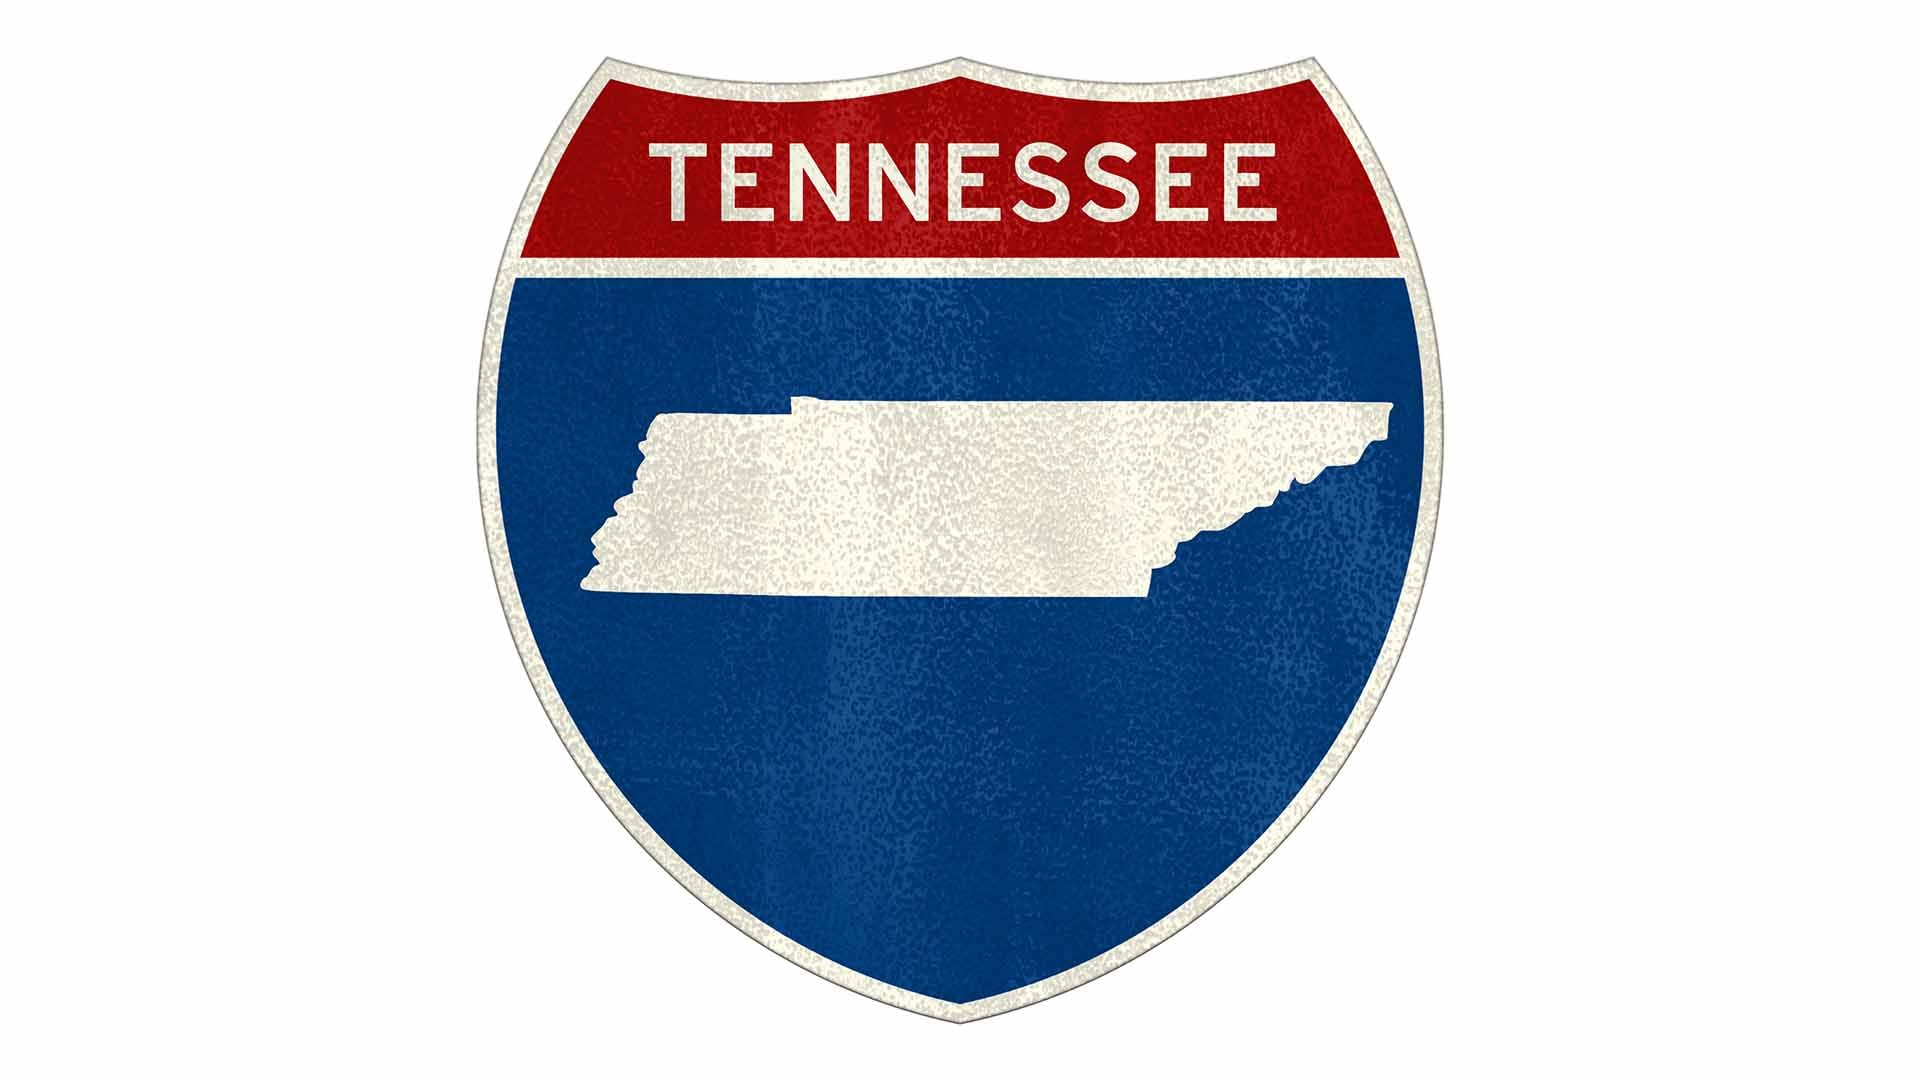 Tennessee state roadside sign